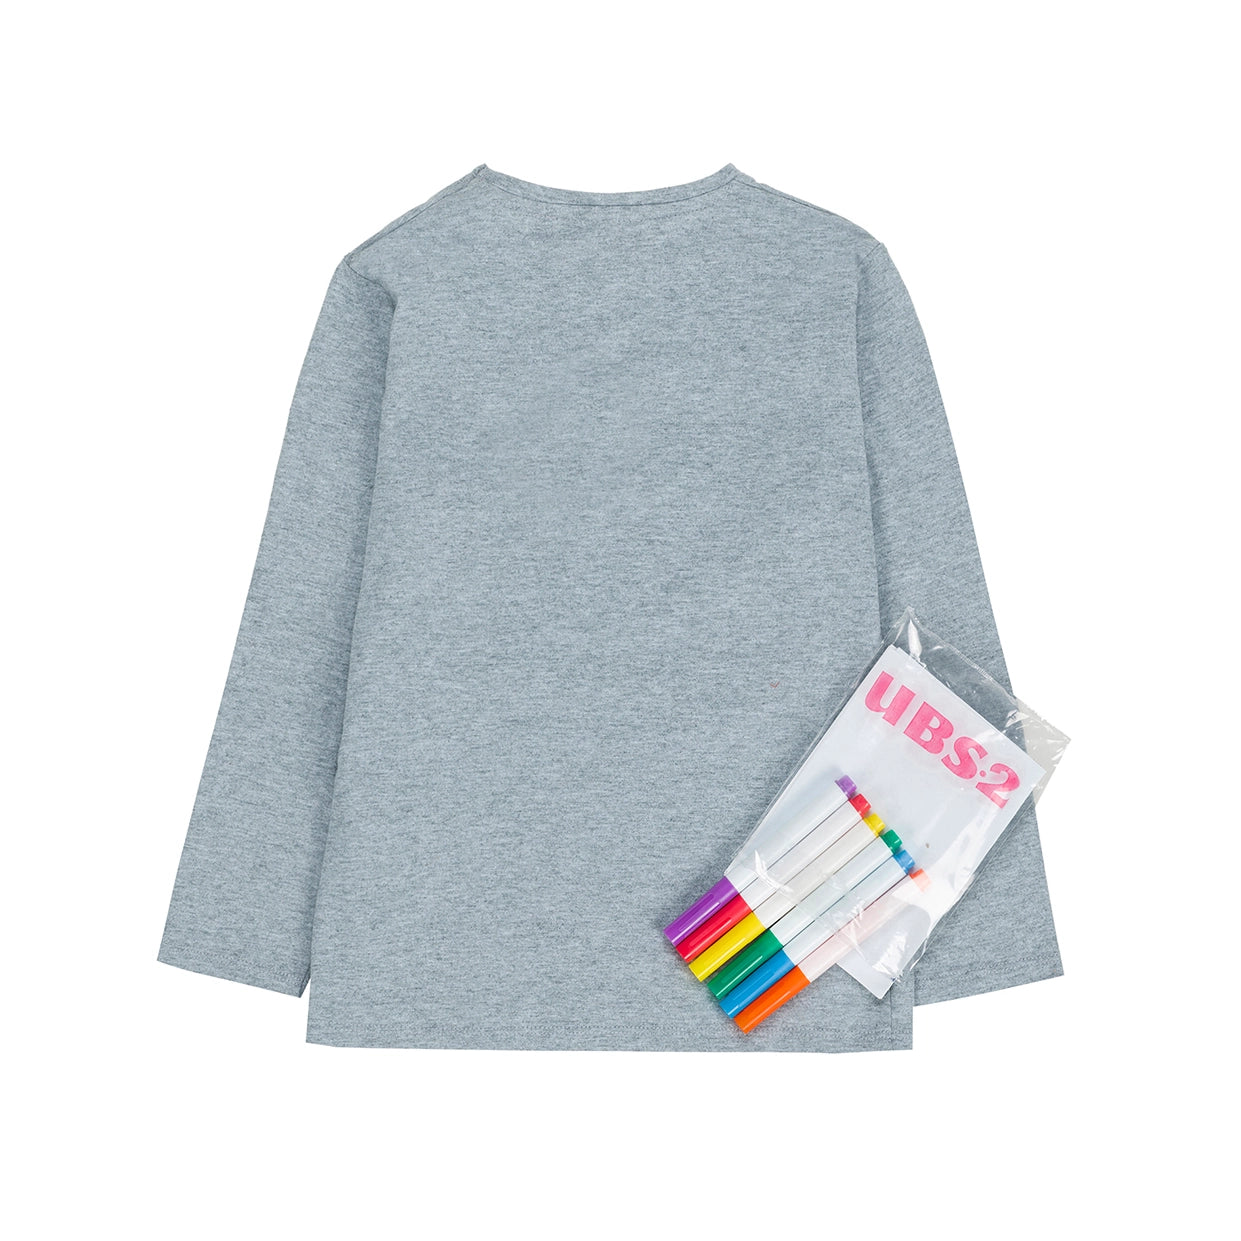 UBS2 Boy's t-shirt in grey cotton jersey, long sleeves.